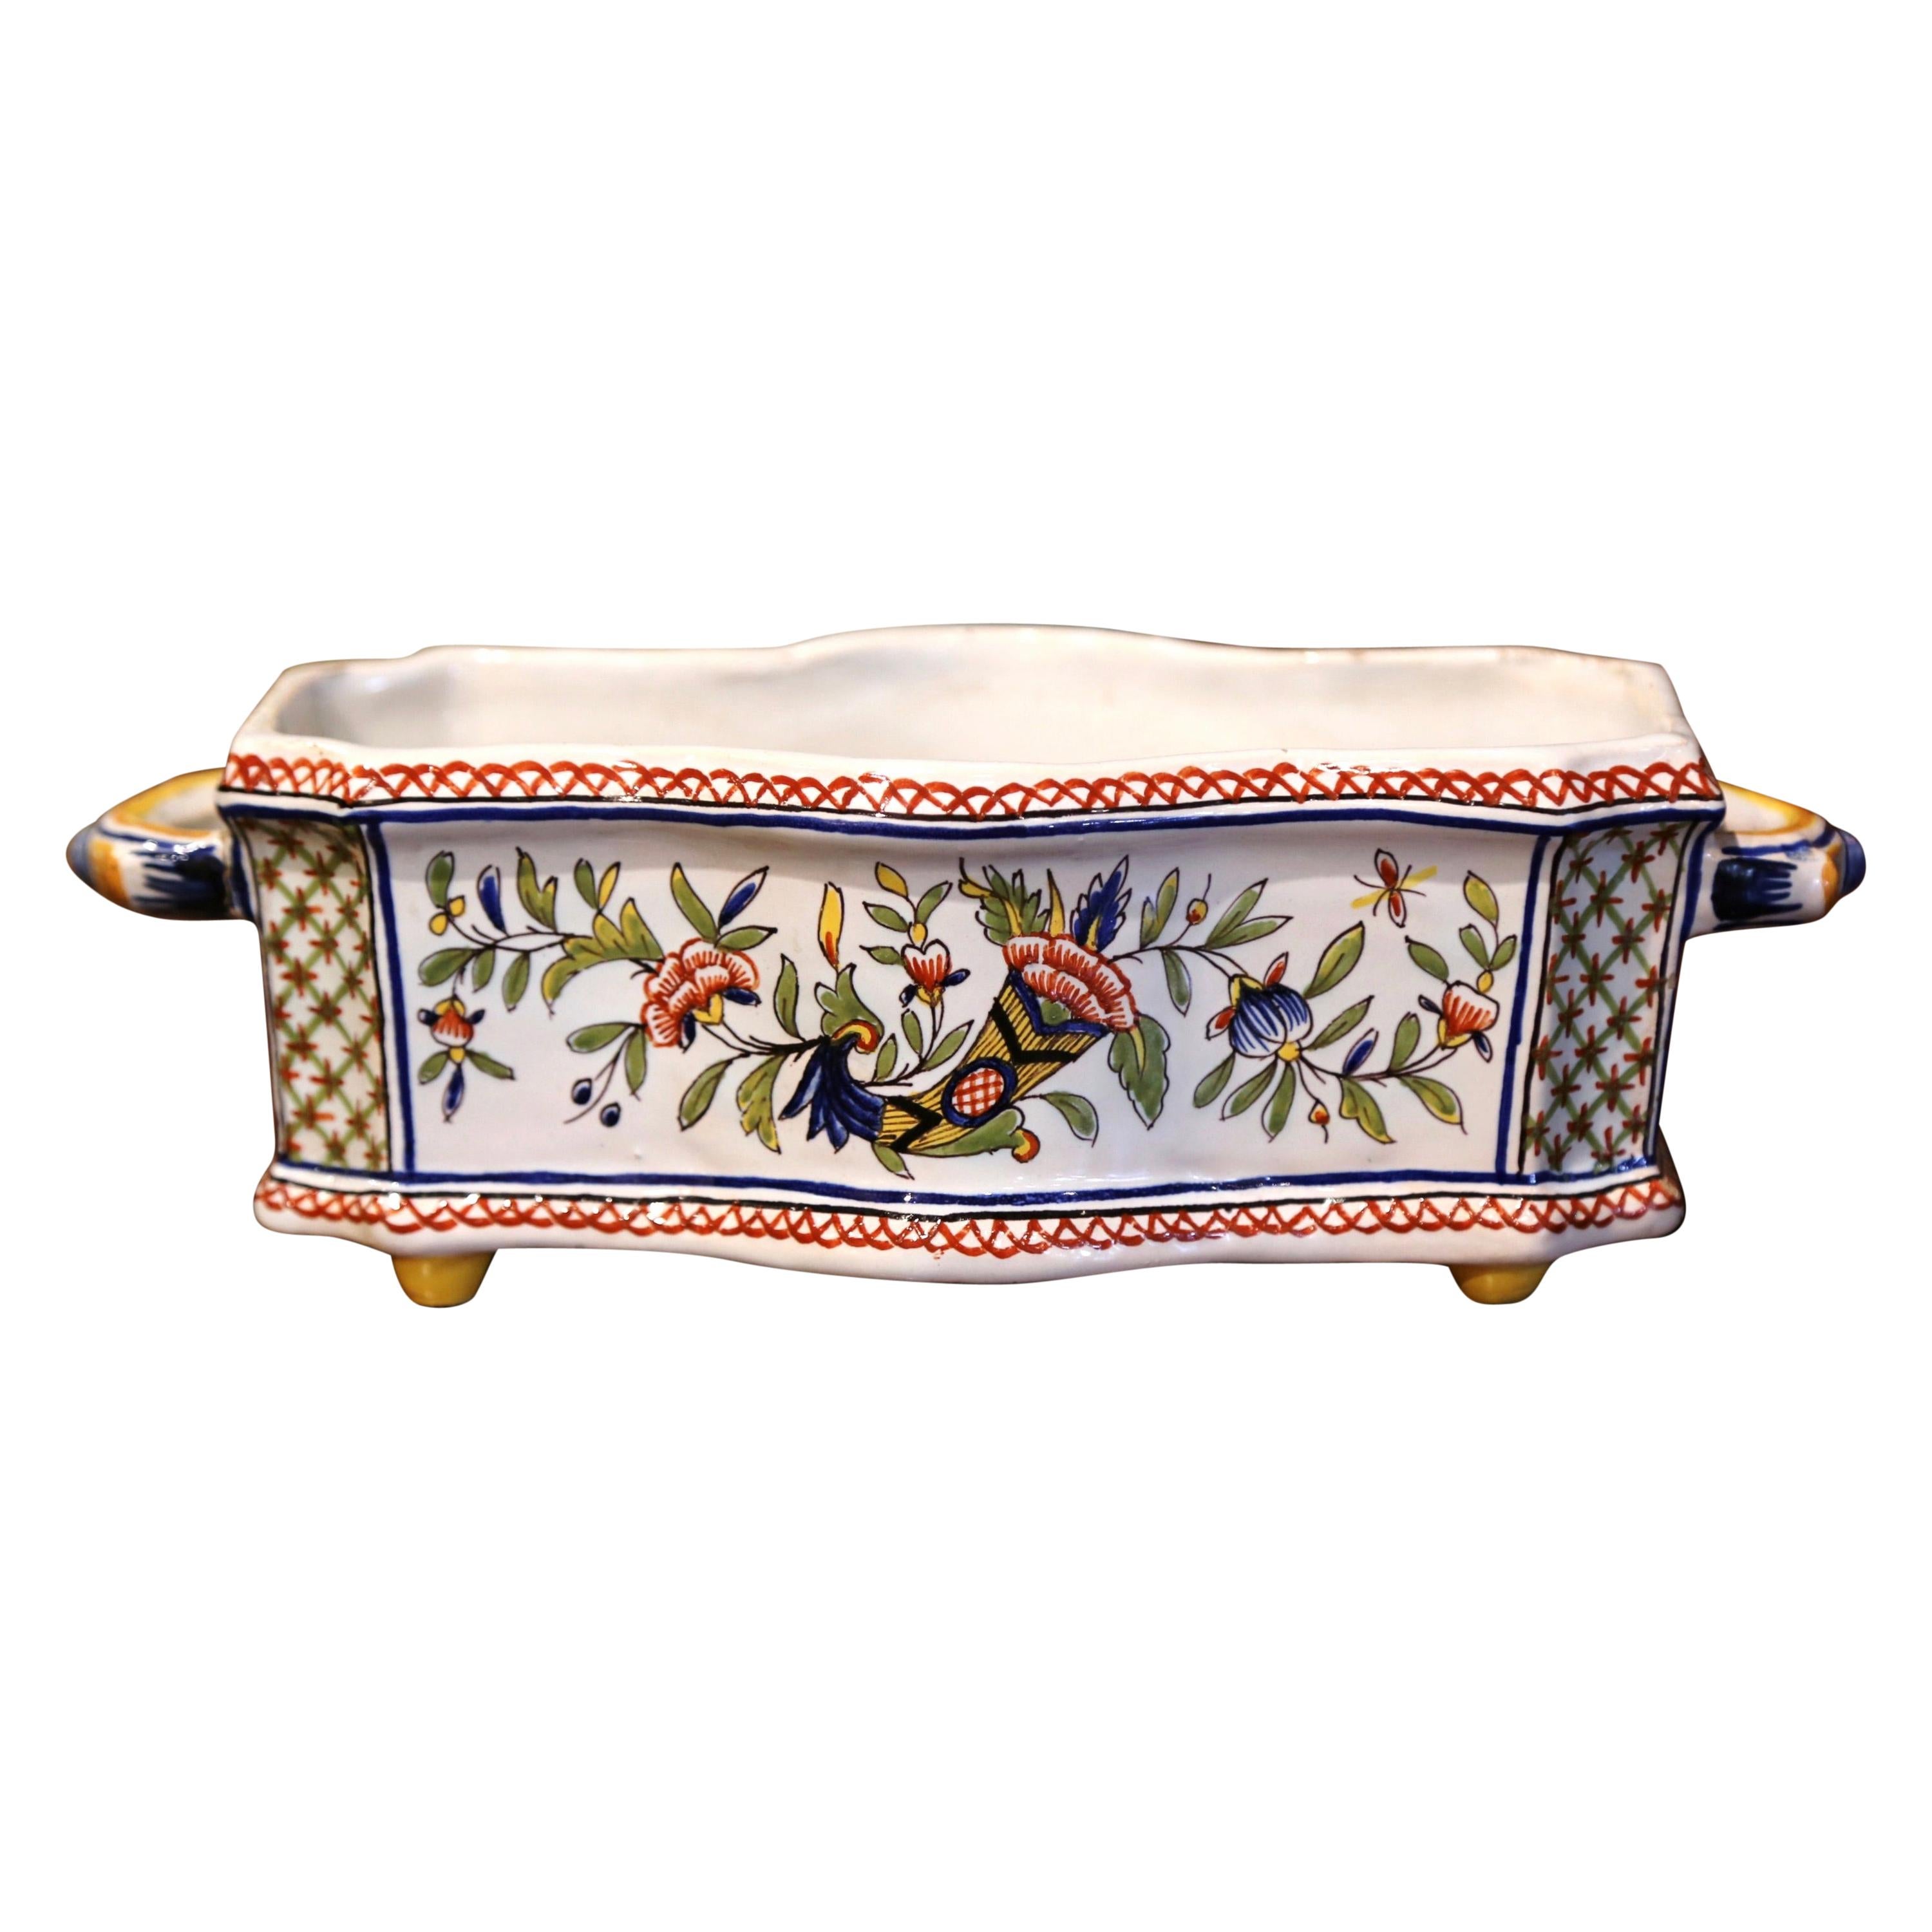 Early 20th Century French Hand-Painted Faience Cache Pot from Rouen For Sale